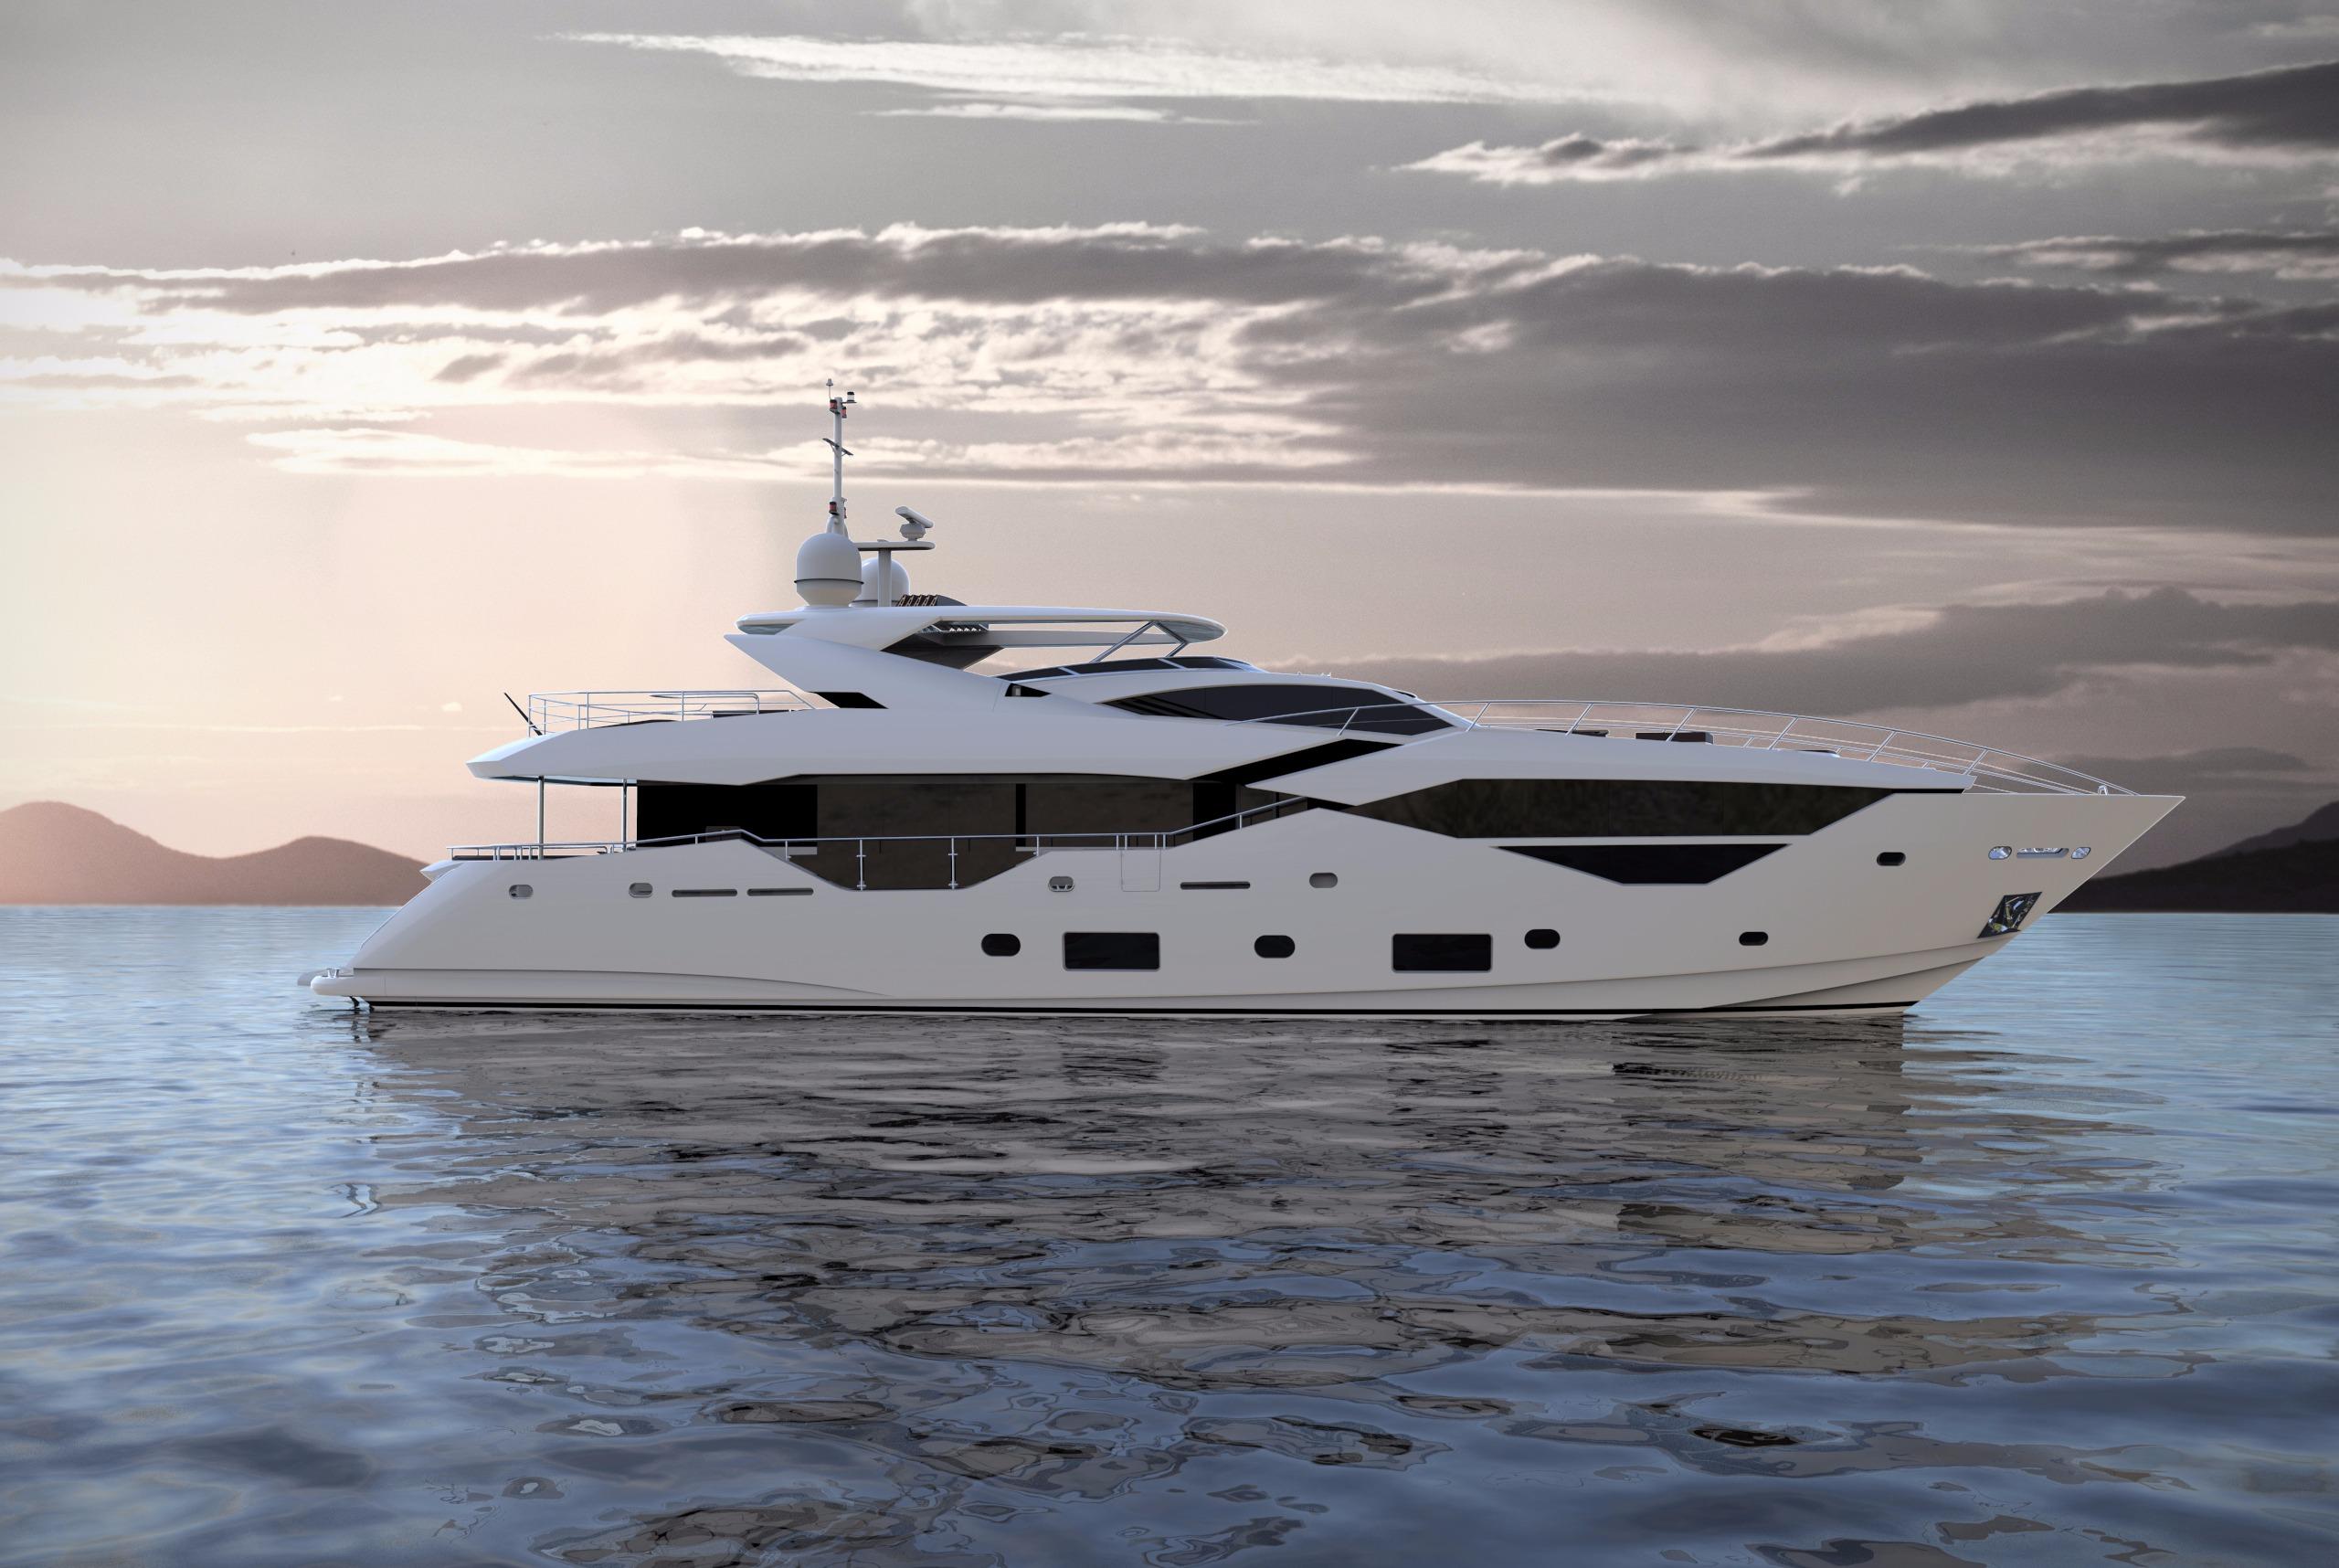  Yacht Photos Pics Manufacturer Provided Image: Sunseeker 116 Yacht Side Profile